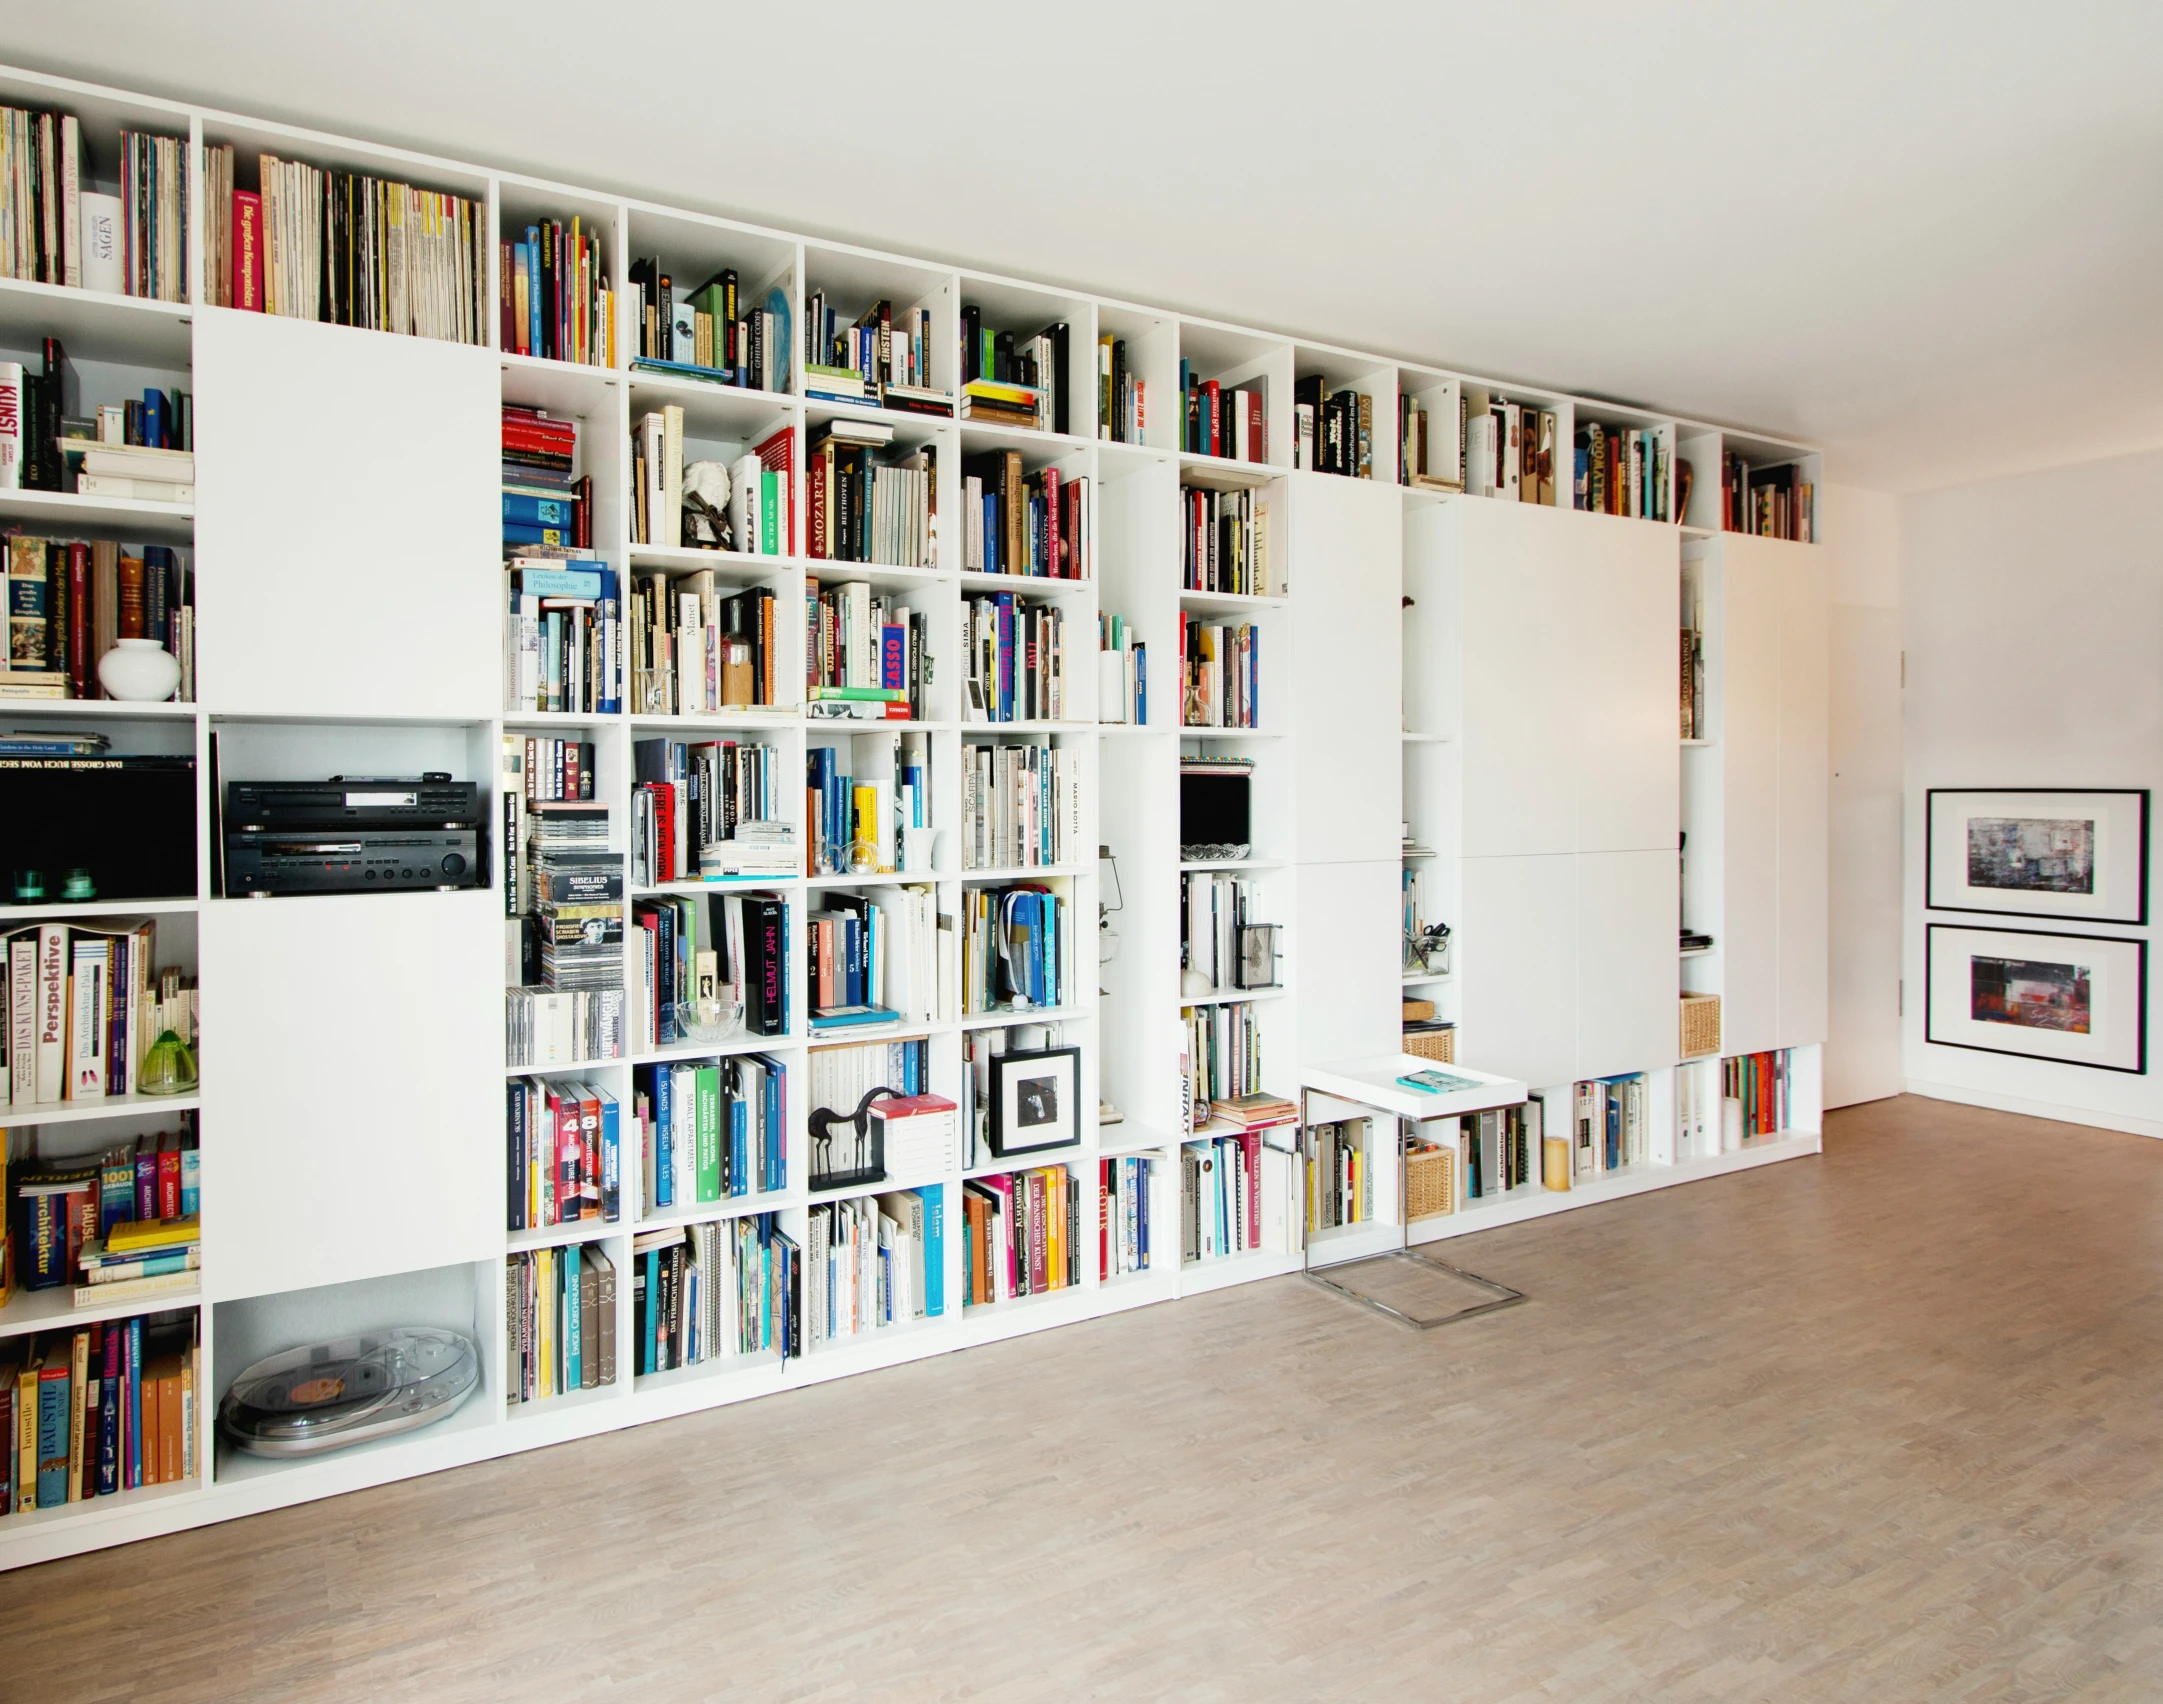 a full view of the bookshelves in the room